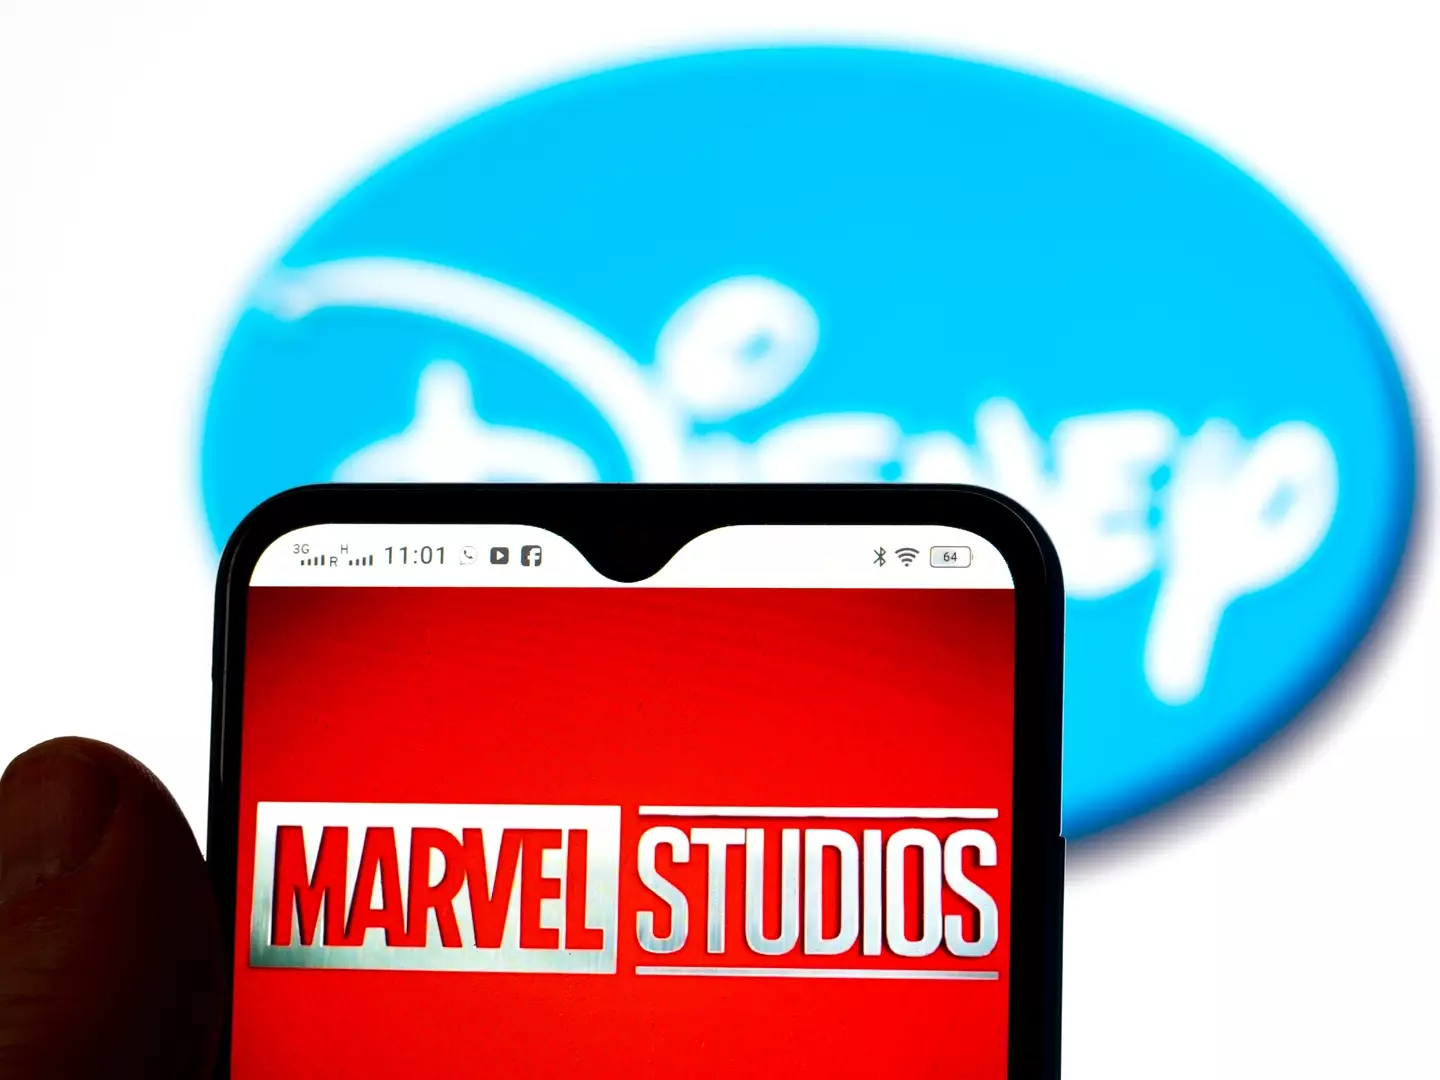 A man has died on the set of an upcoming Marvel series.